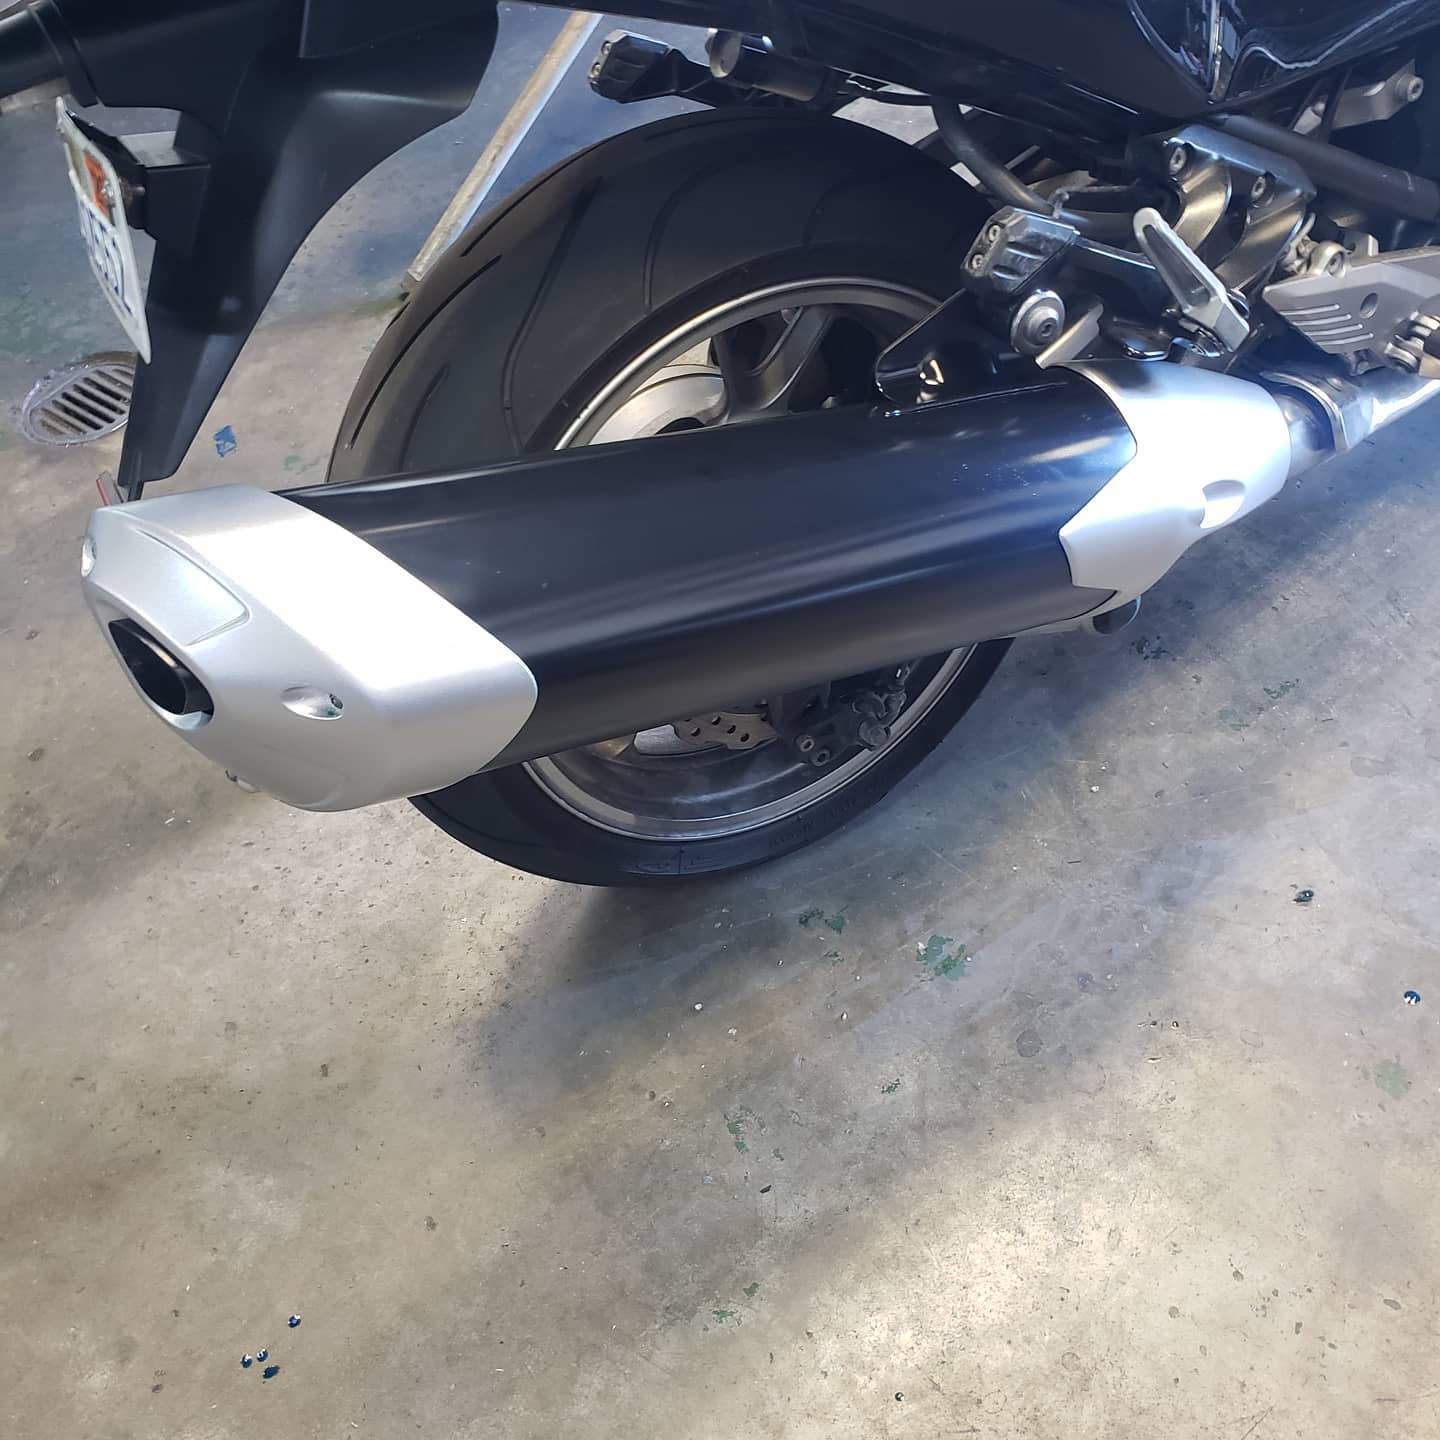 Refurbished a exhaust